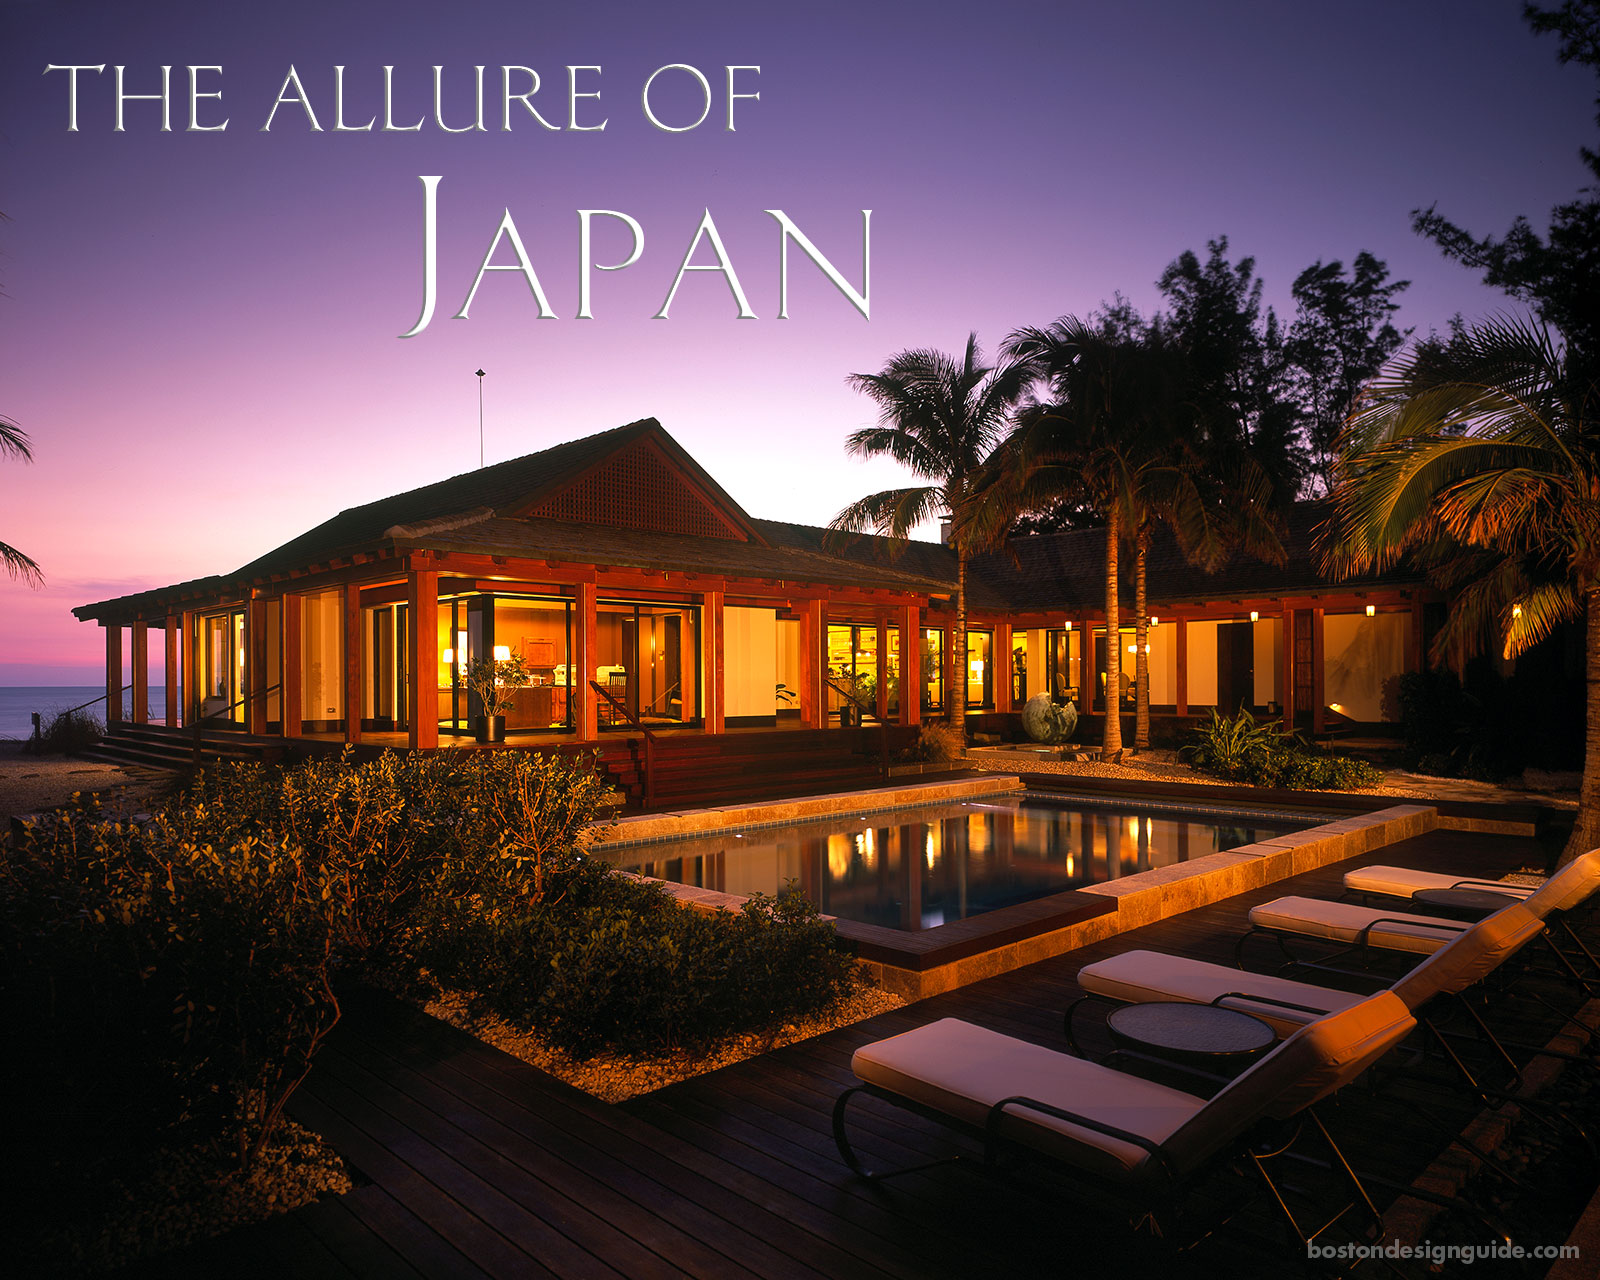 Architectural and landscape design inspired by Japan by ZEN Associates, Inc.